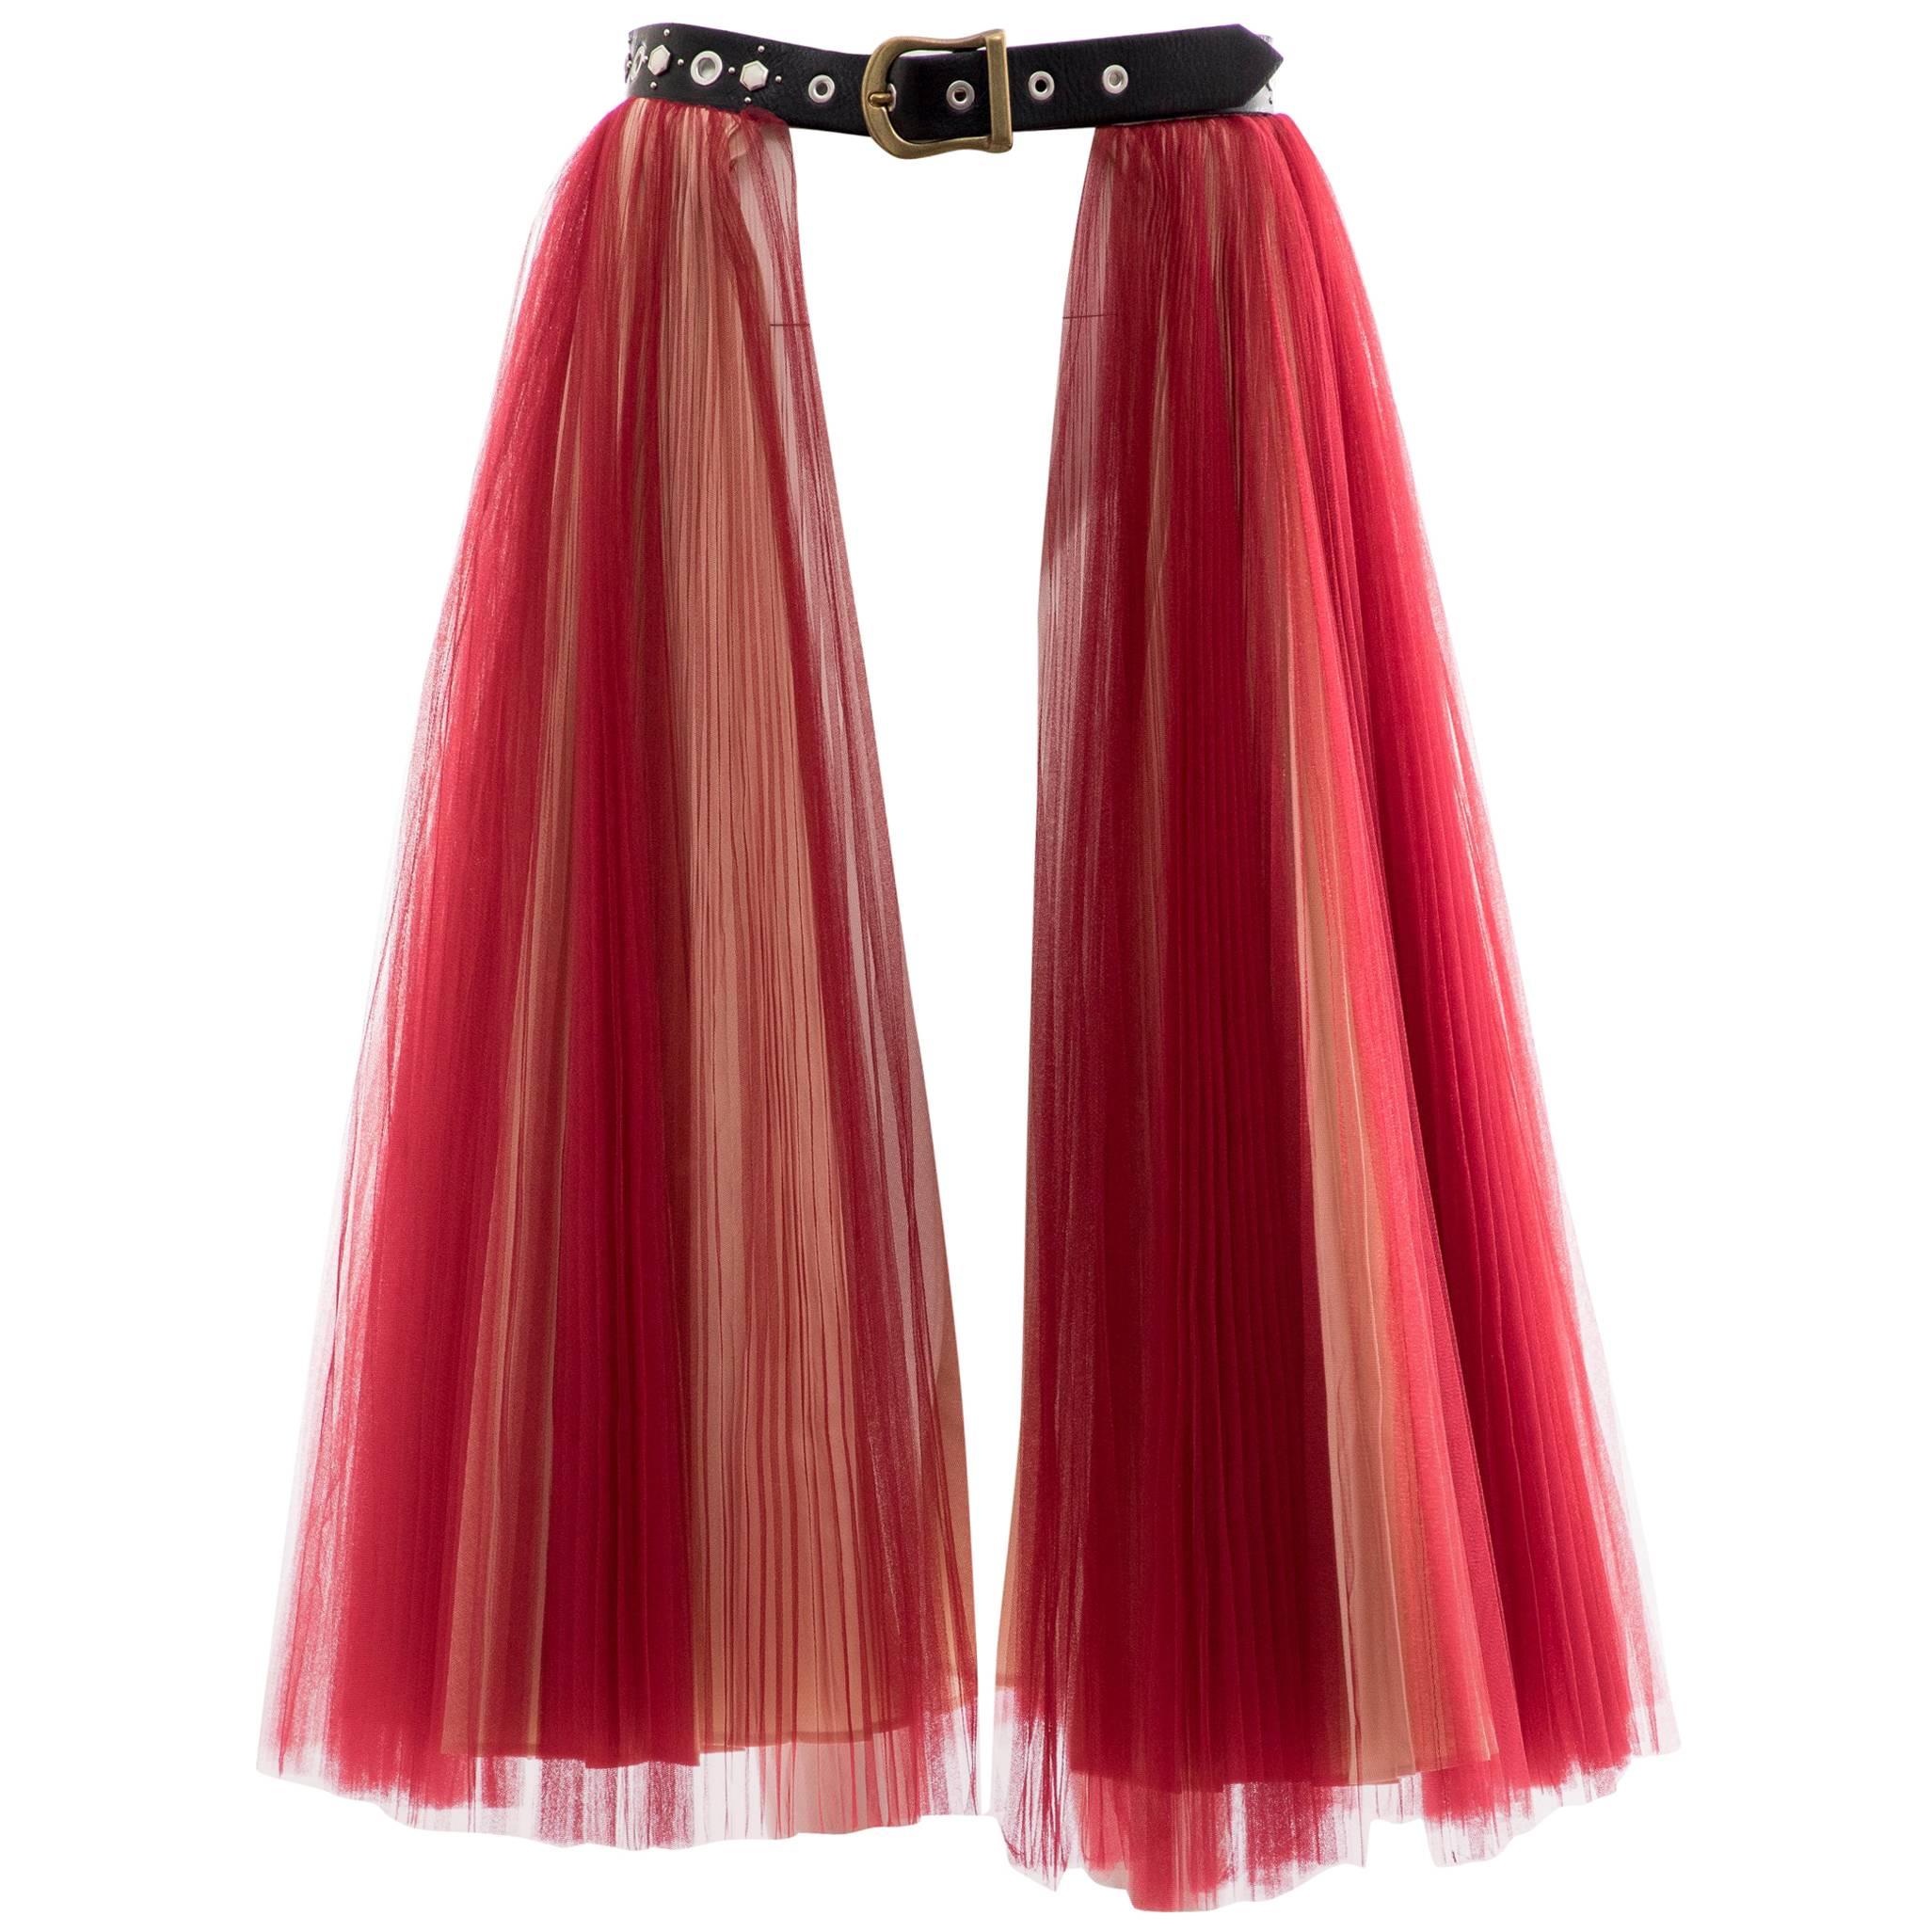 Undercover - Jun Takahashi Red Tulle Silver Pleated Skirt, Spring 2016